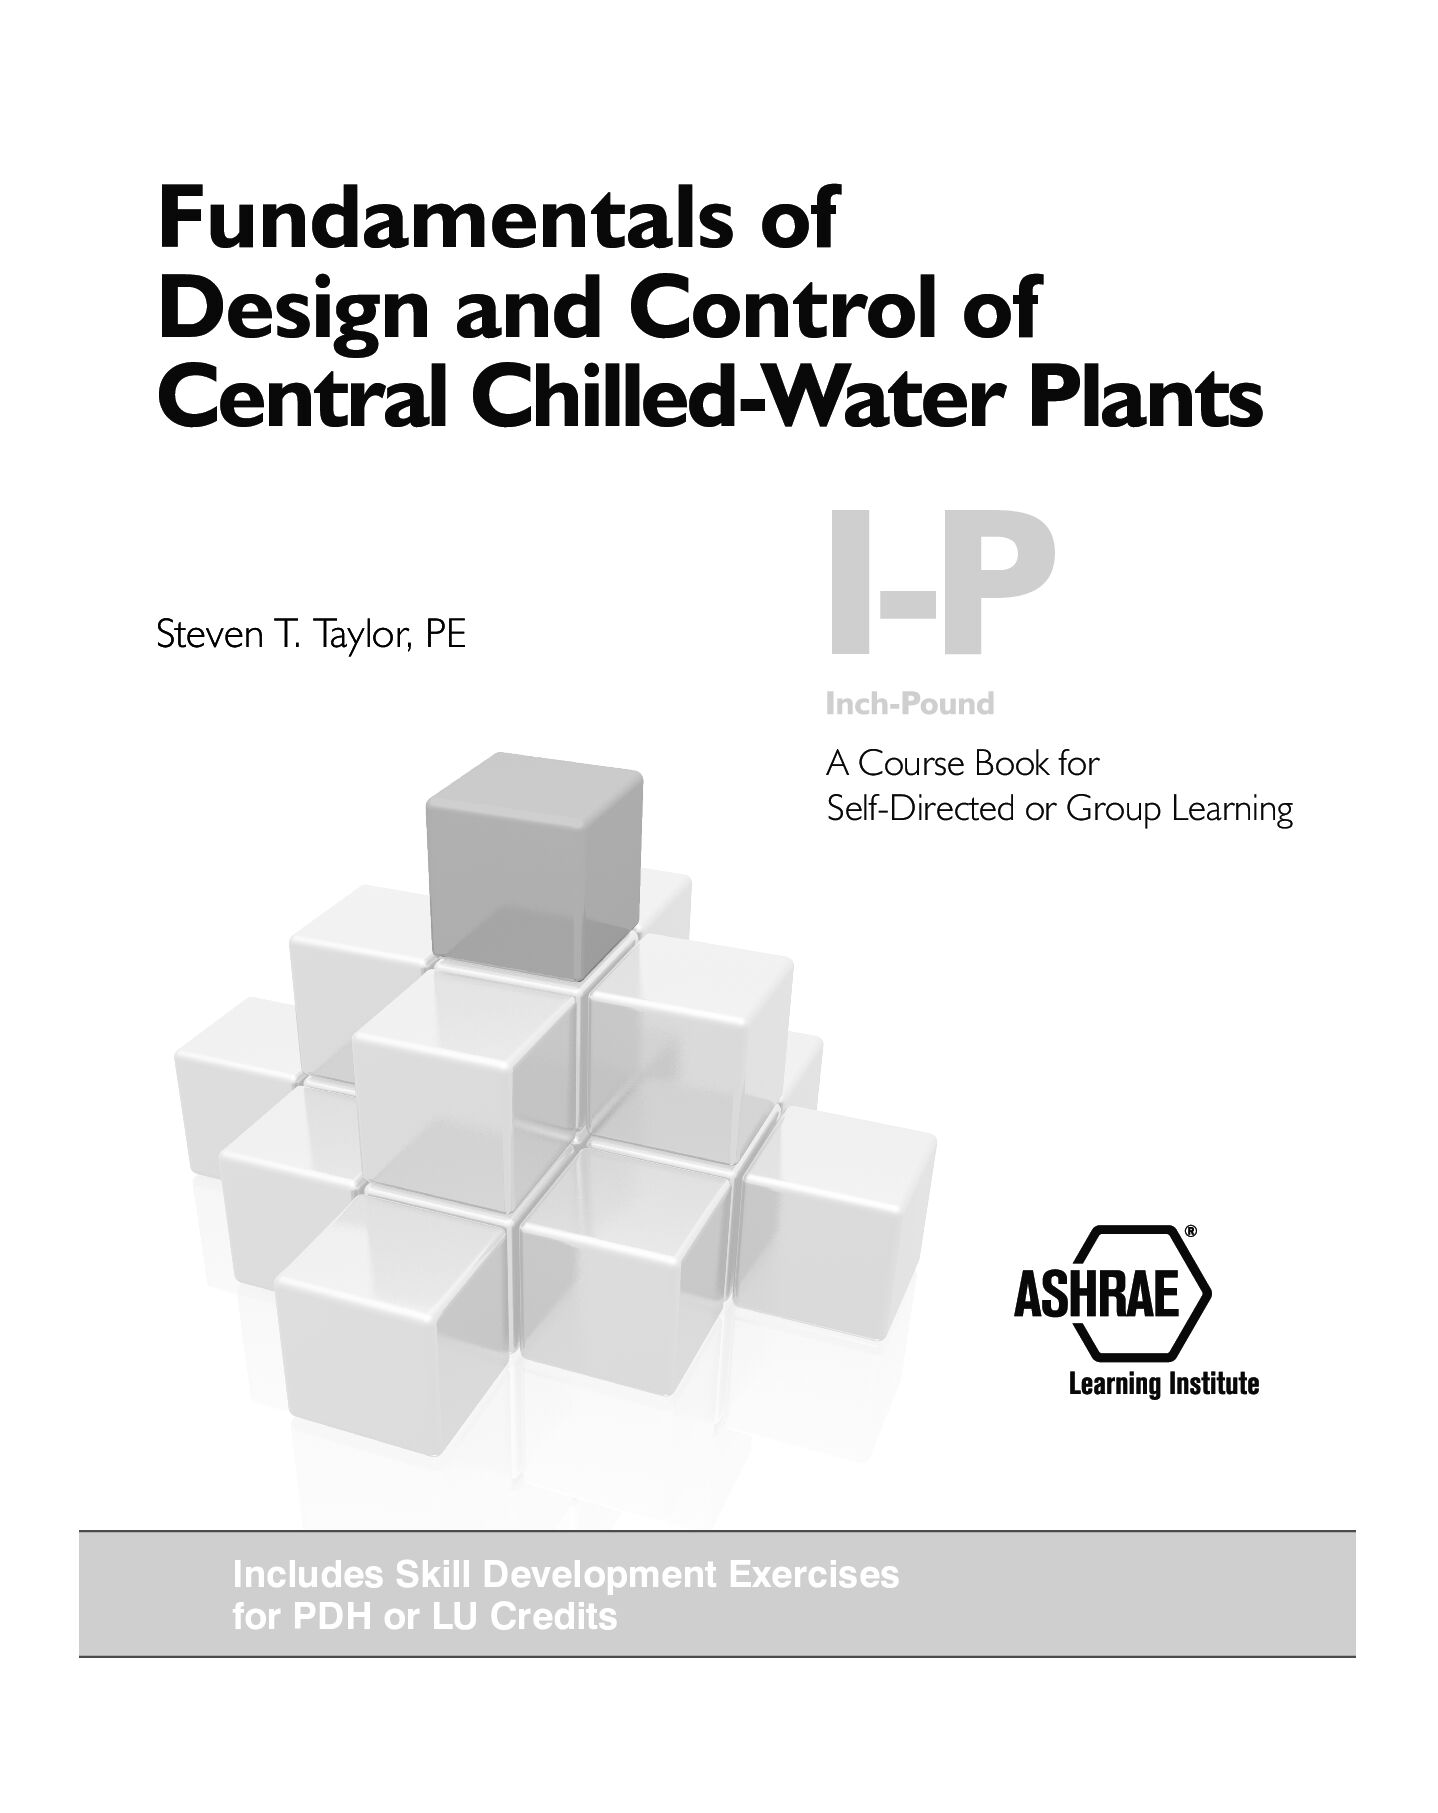 Fundamentals of Design and Control of Central Chilled-Water Plants (I-P) 2017封面图